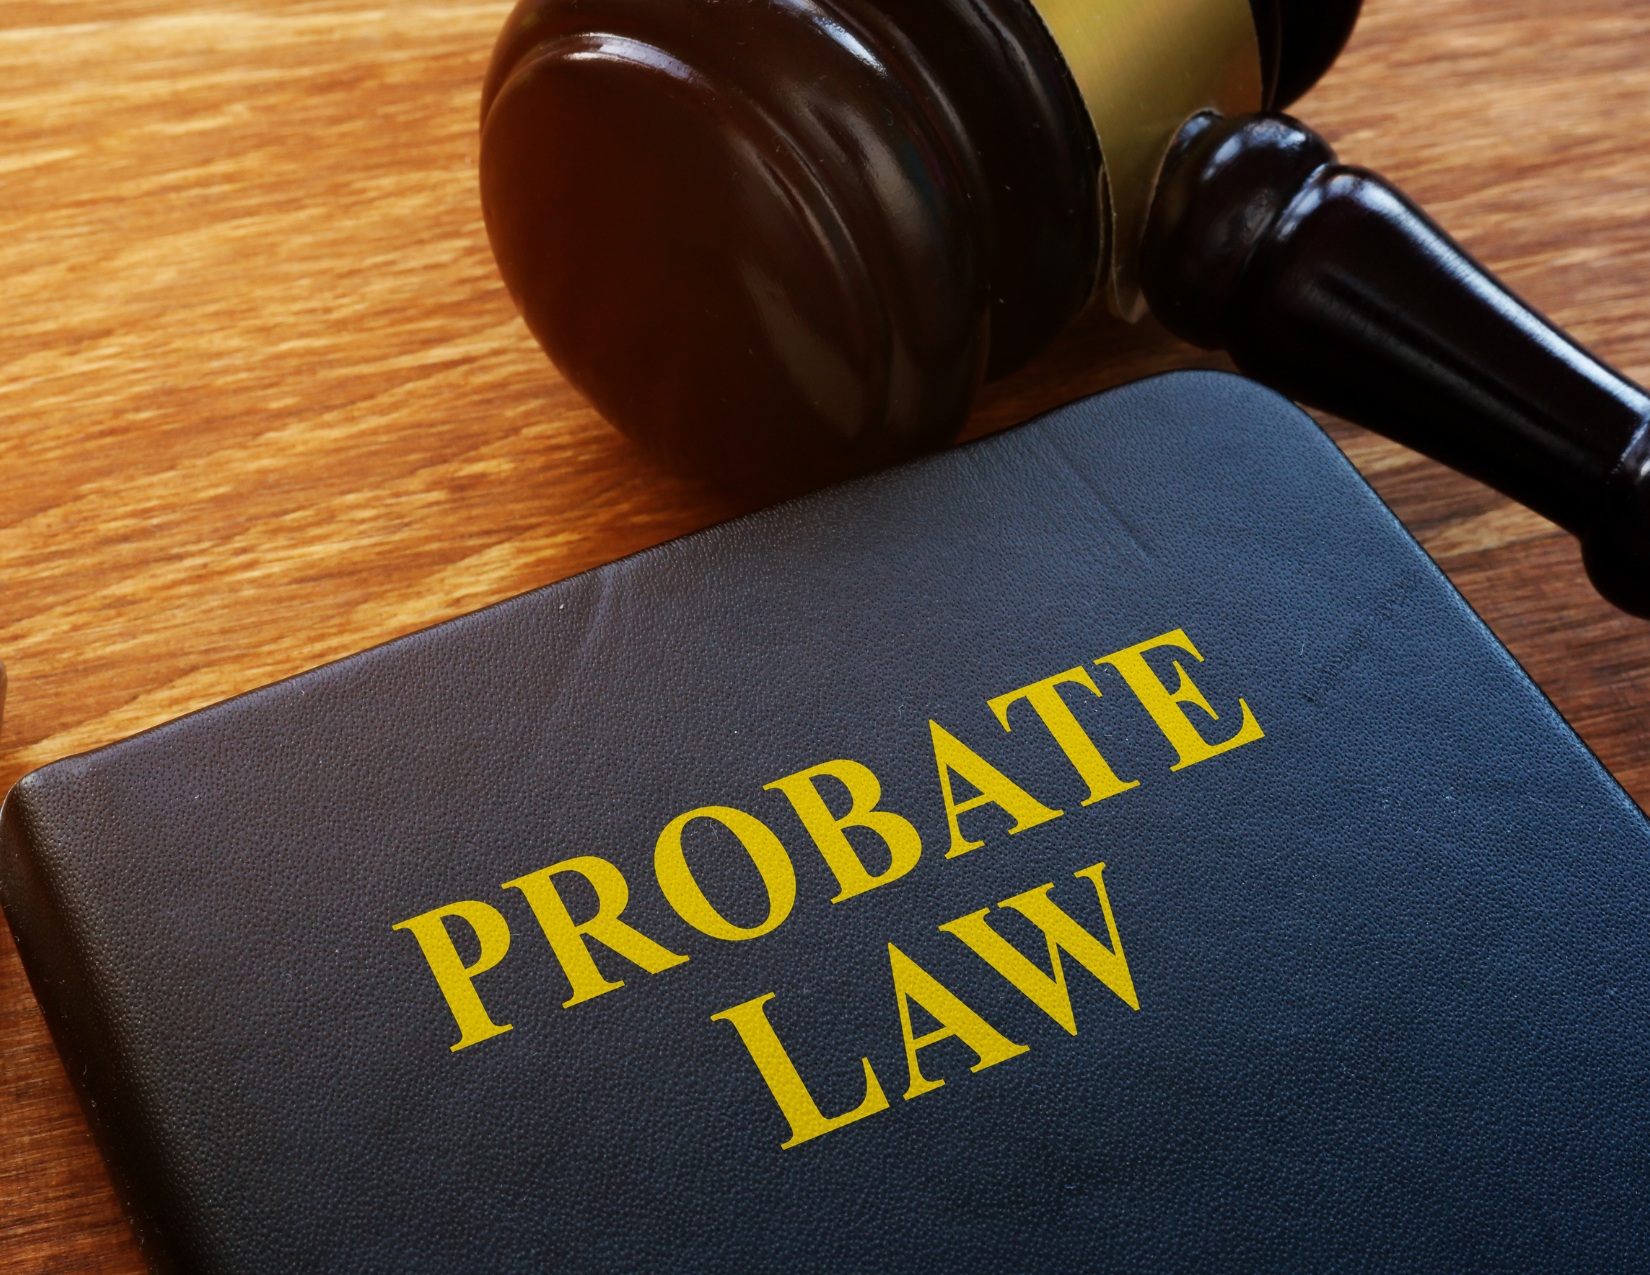 Probate attorneys in Oklahoma City, Probate Lawyers in OKC